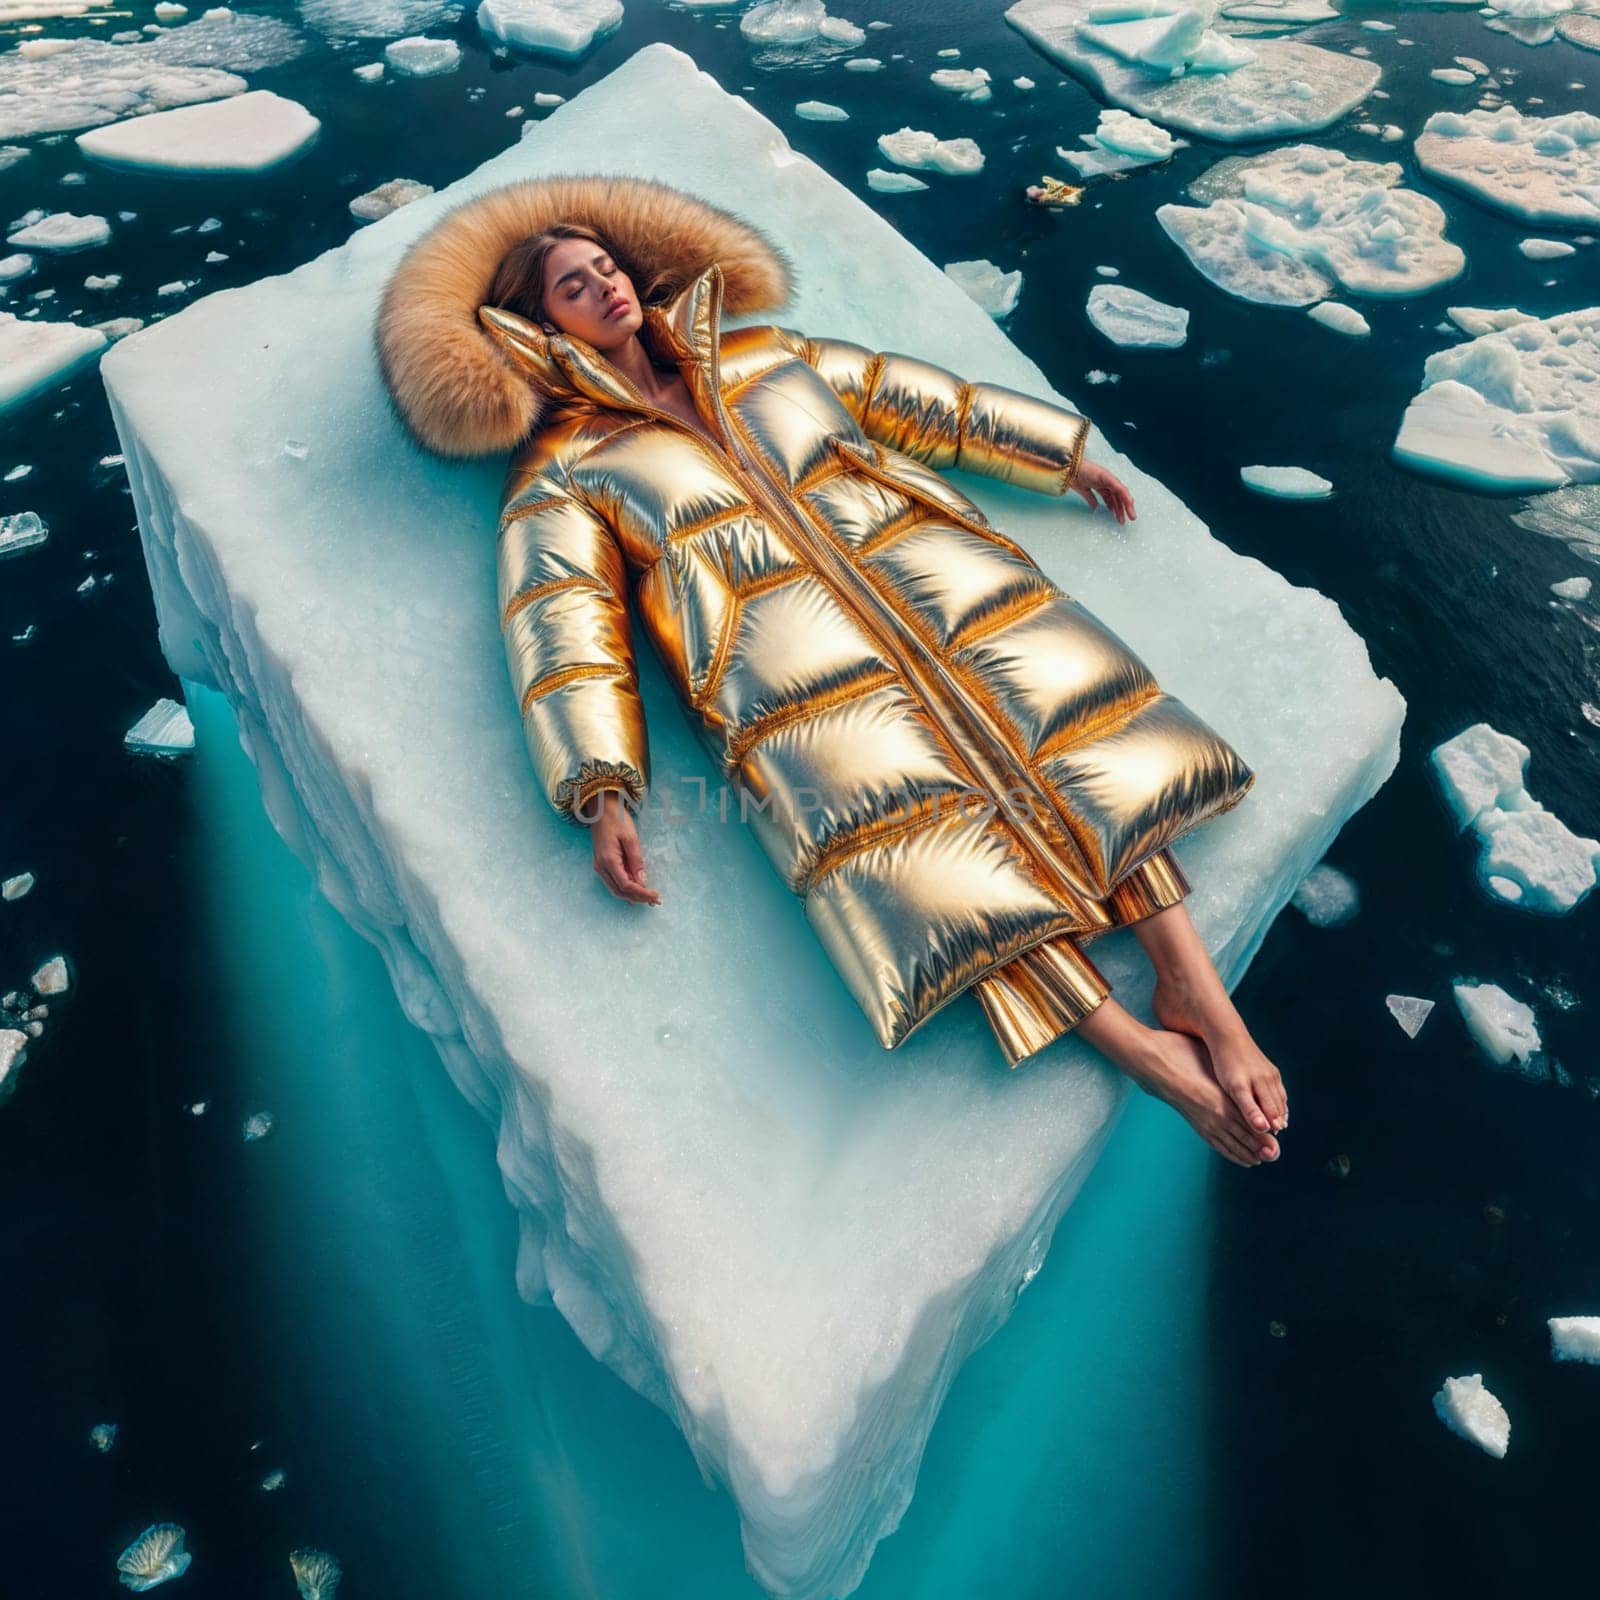 Woman in yellow golden puffer jacket lies on a block of ice alone in the middle of the ocean sea. Environmental issue, climate change agenda, AI generated